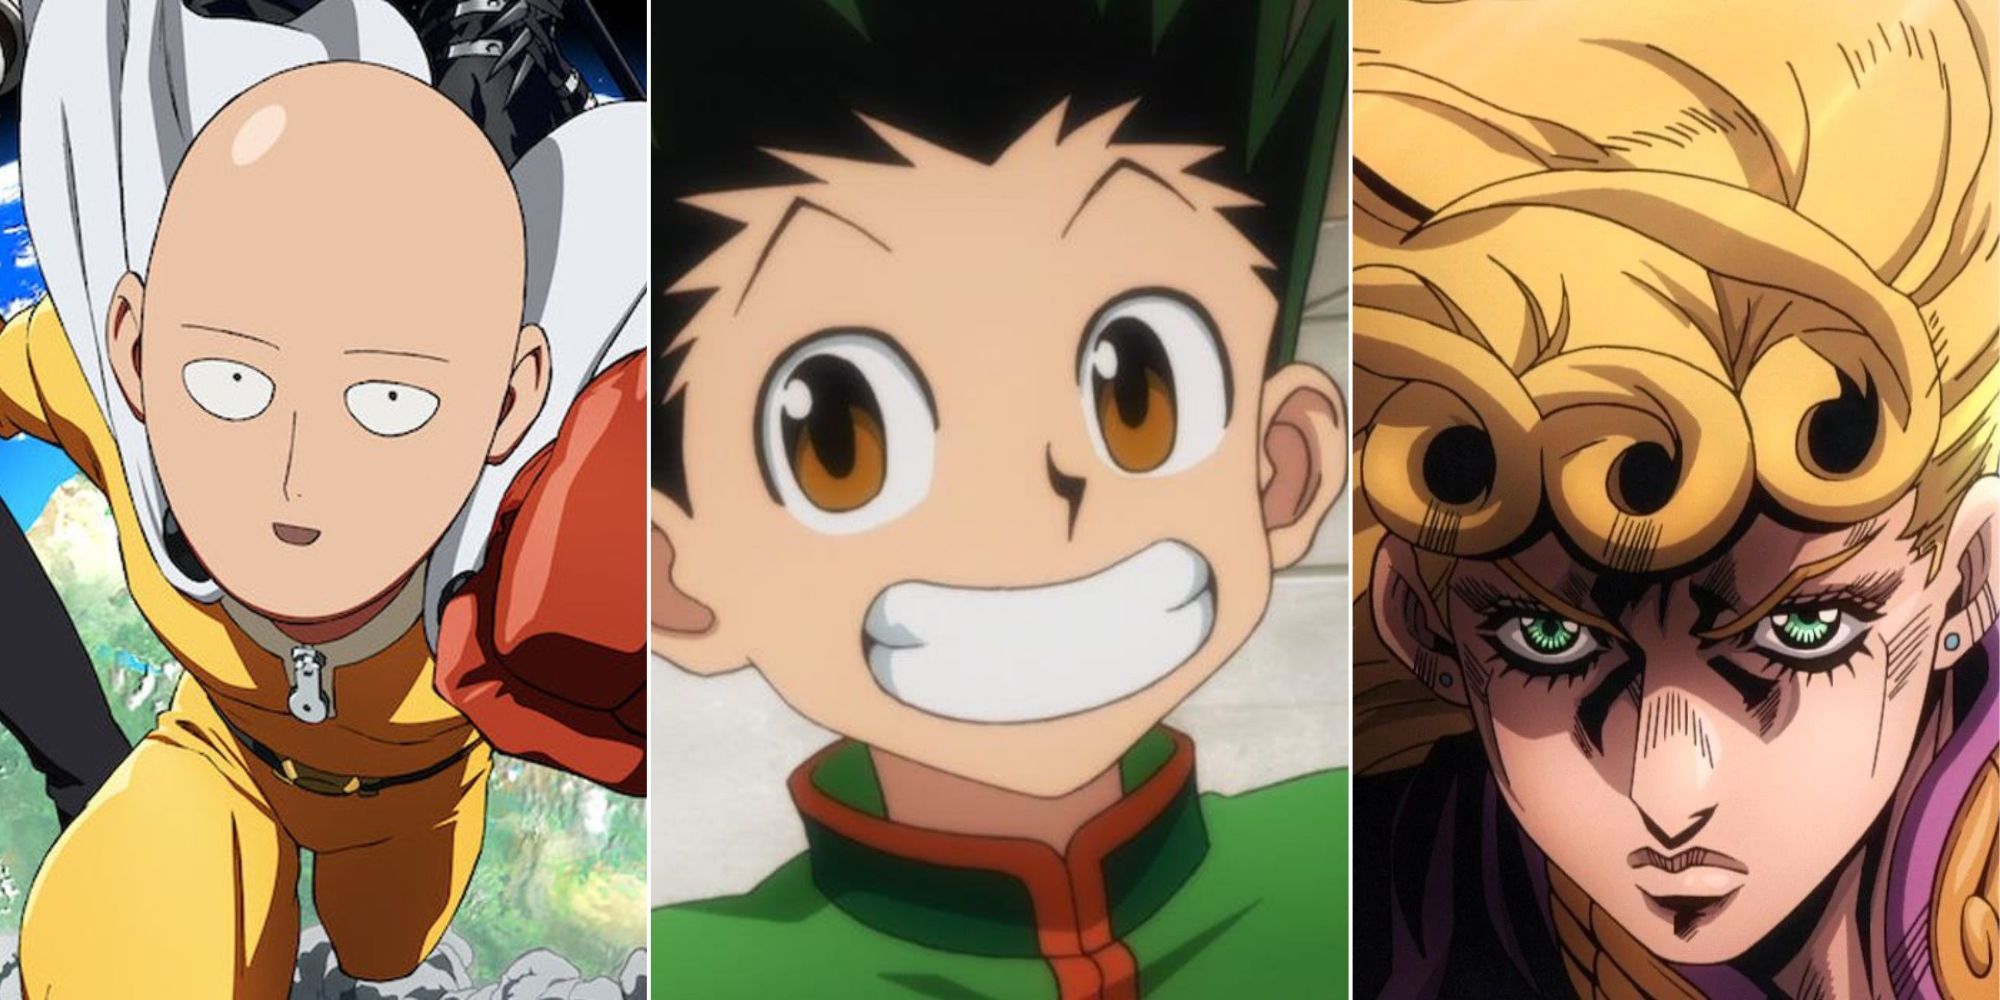 triple image of saitama from one punch man, Gon from hunter x hunter and Giorno from jojo's bizarre adventure